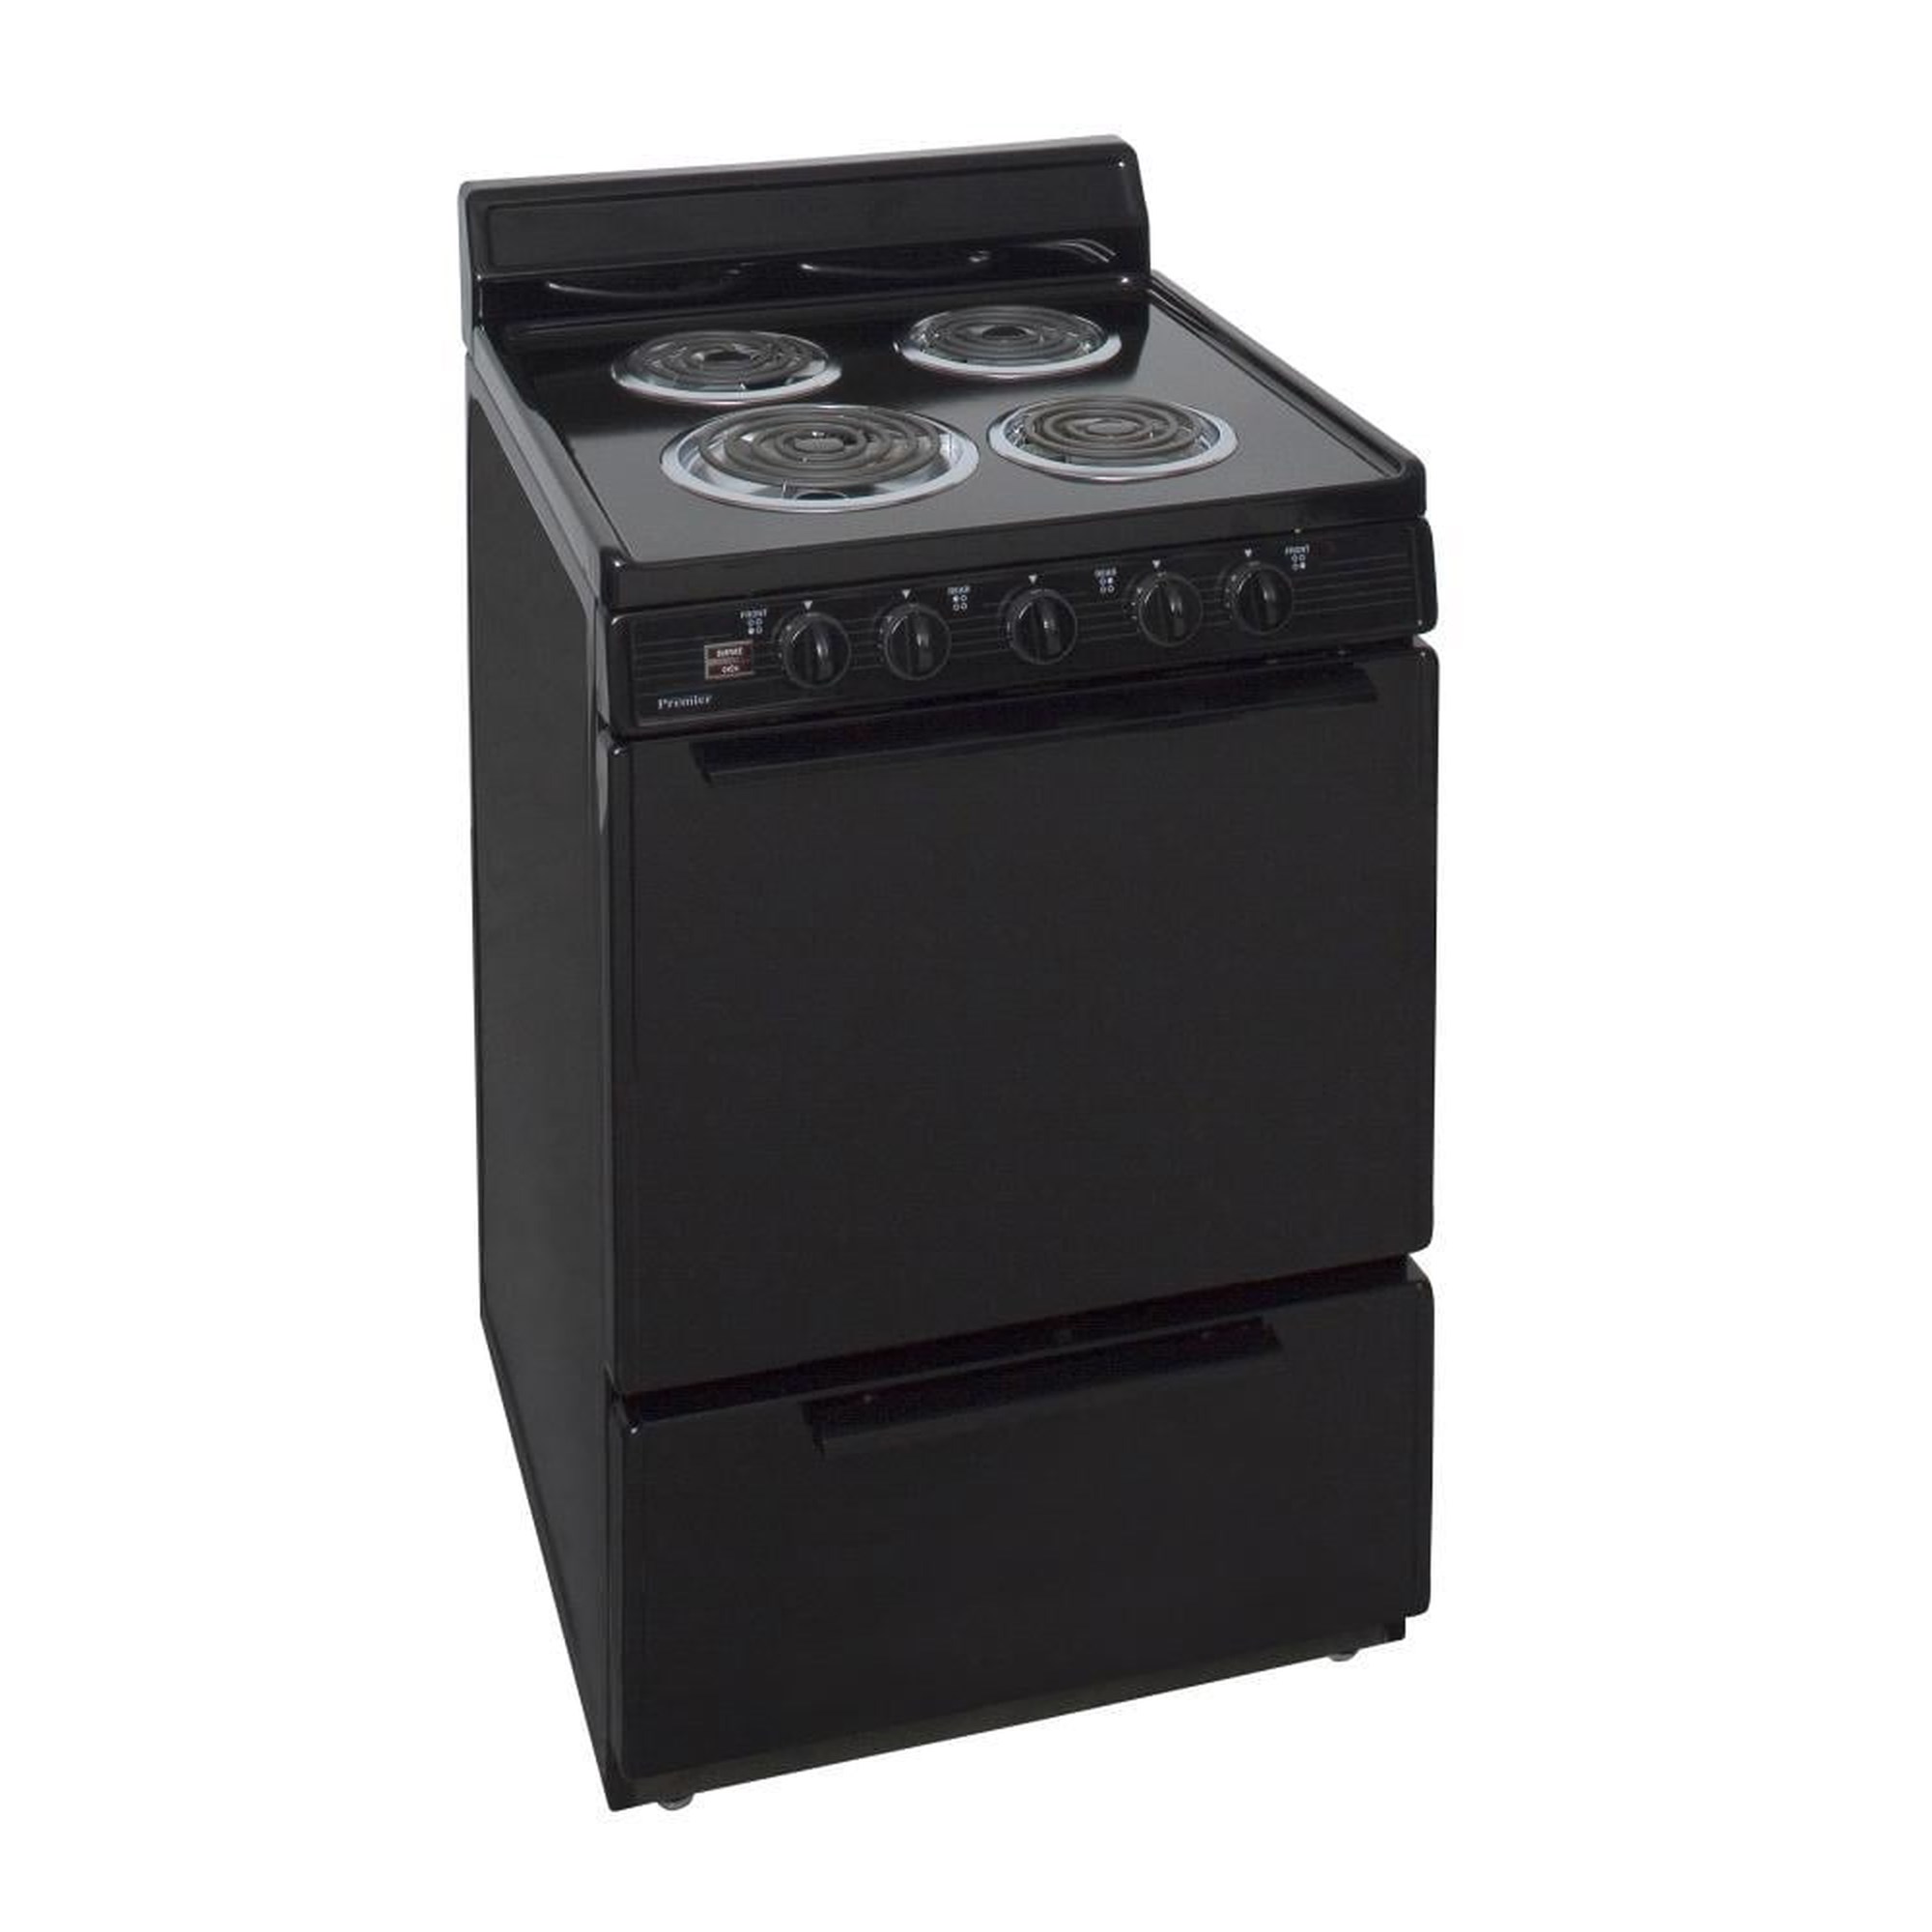 Premier ECK600BP 24 Inch Freestanding Electric Range with 4 Coil